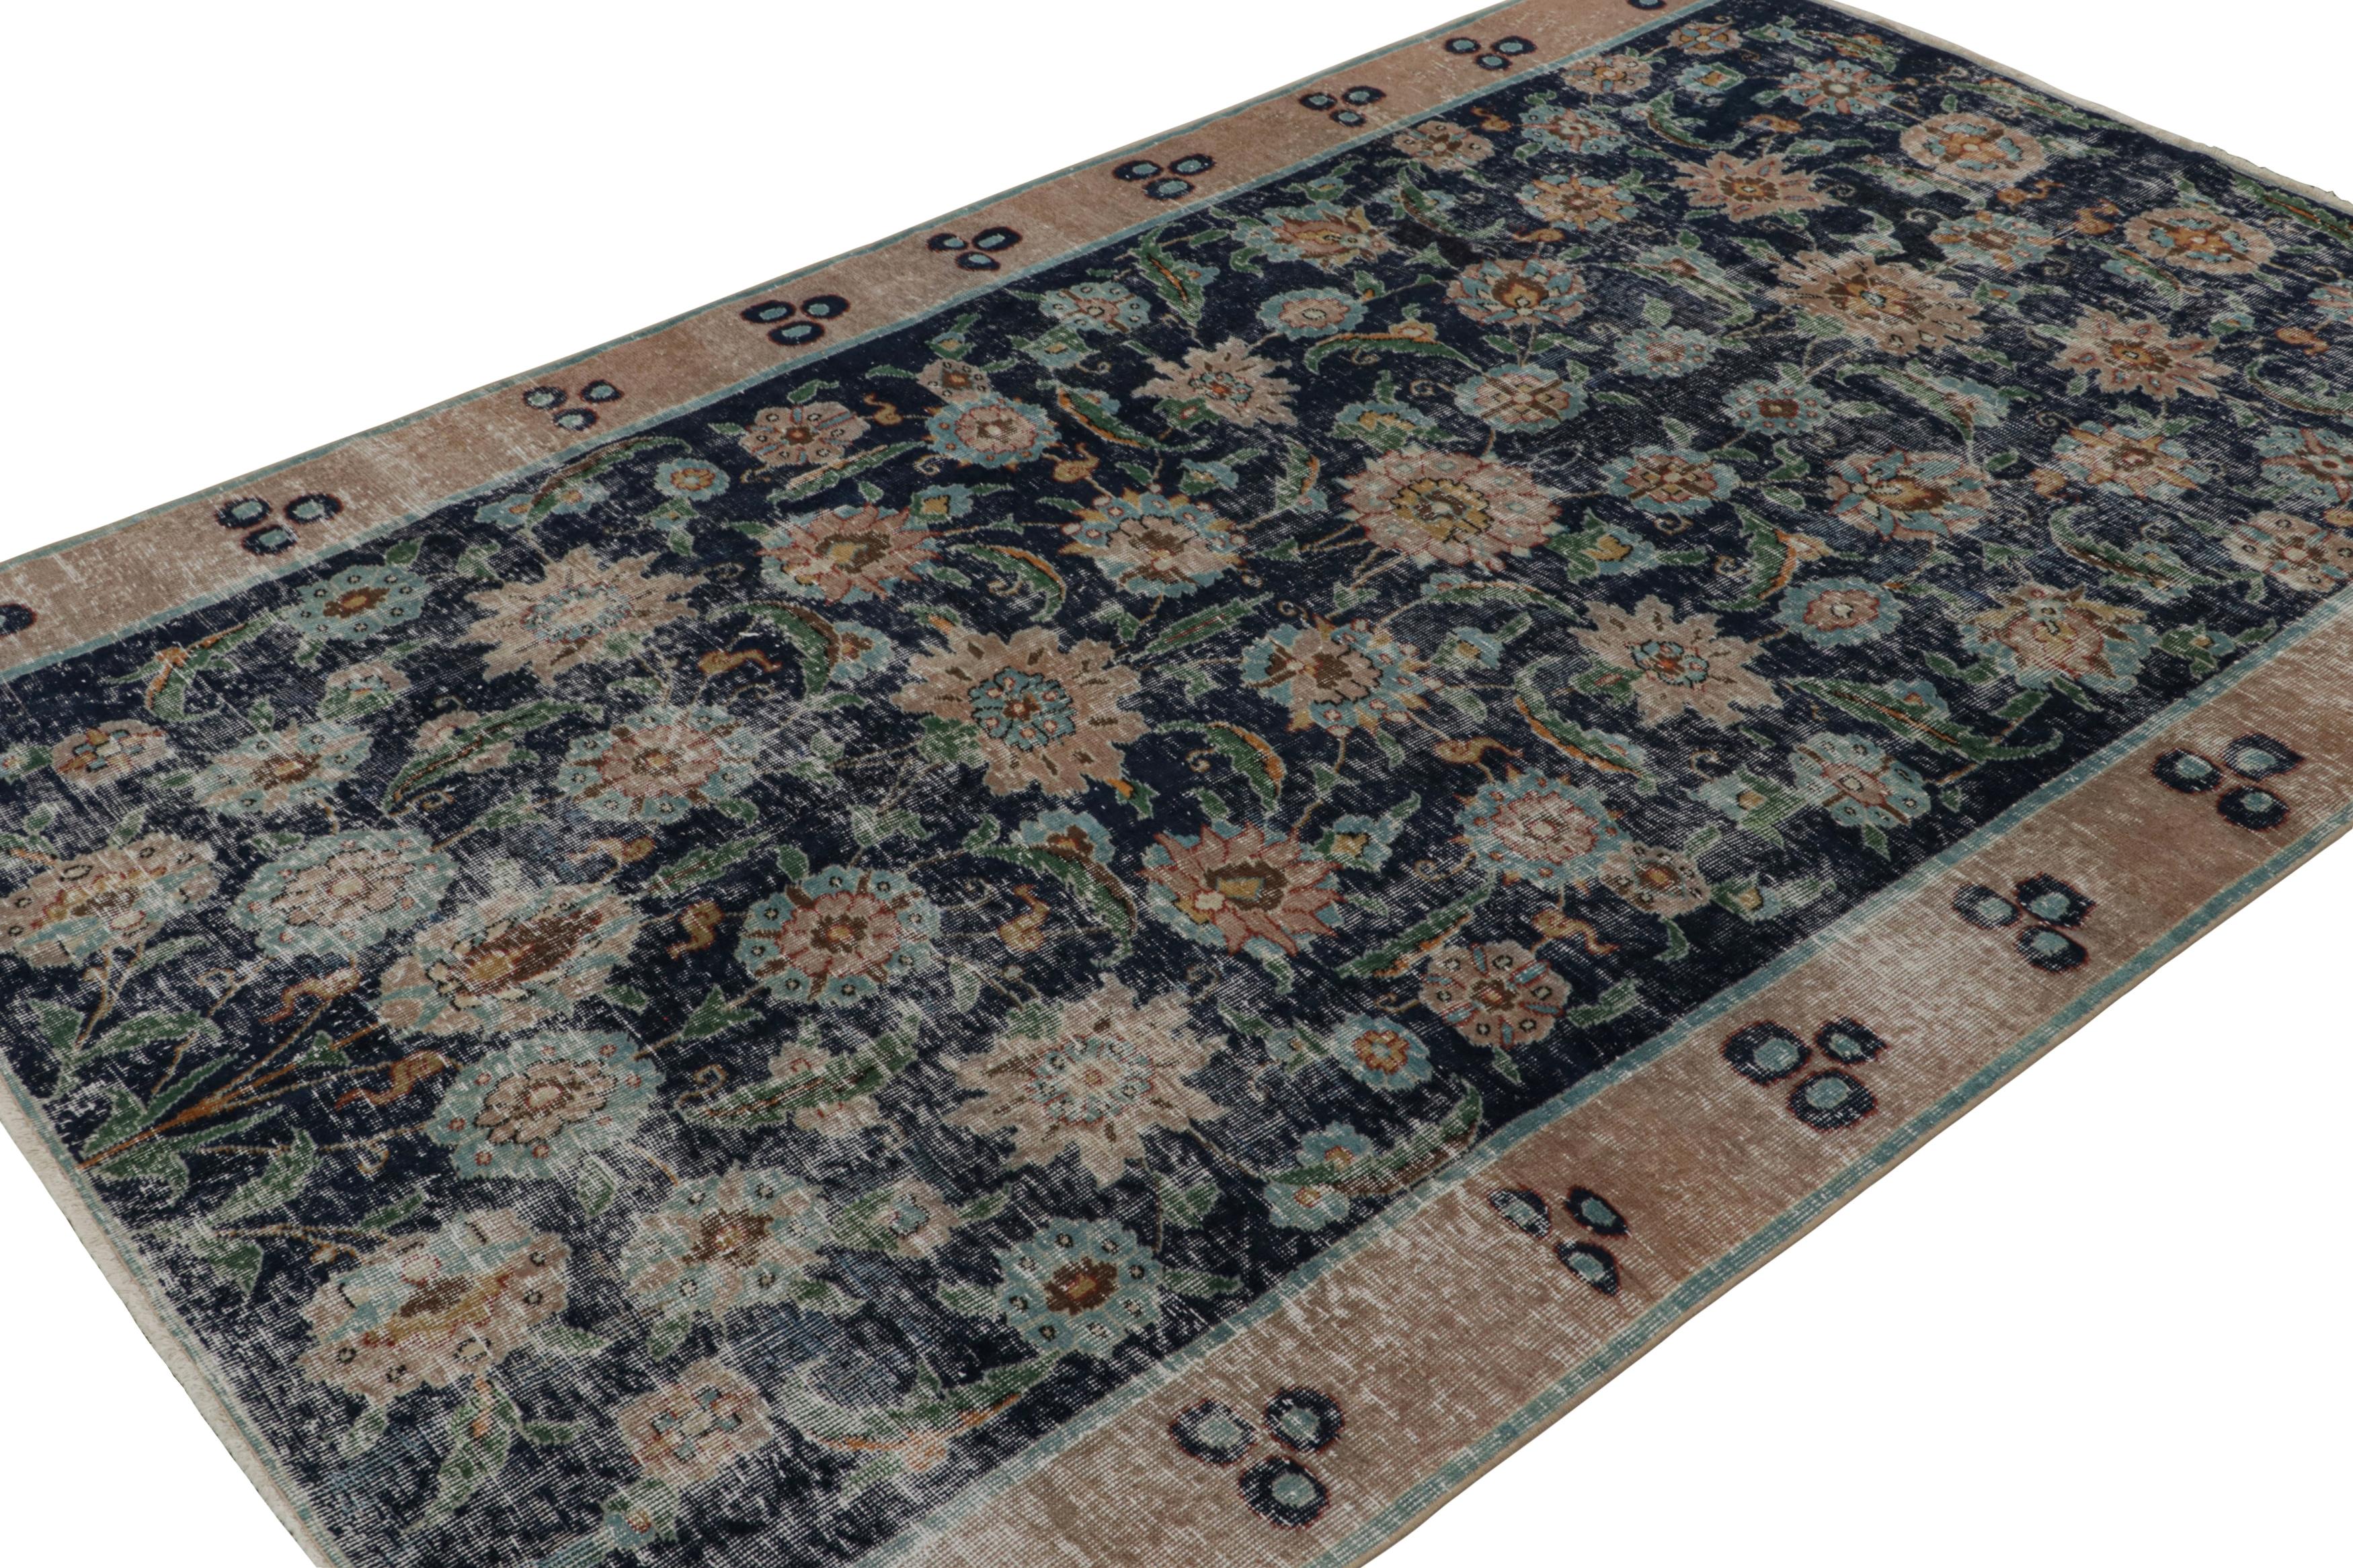 Hand-knotted in wool, circa 1960 - 1970, this 6x10 vintage Müren Floral rug, displaying a subversive take on traditional rug styles, is a rare work of mid-century atelier Zeki Müren. 

On the Design: 

Showcasing a subversive take on traditional rug